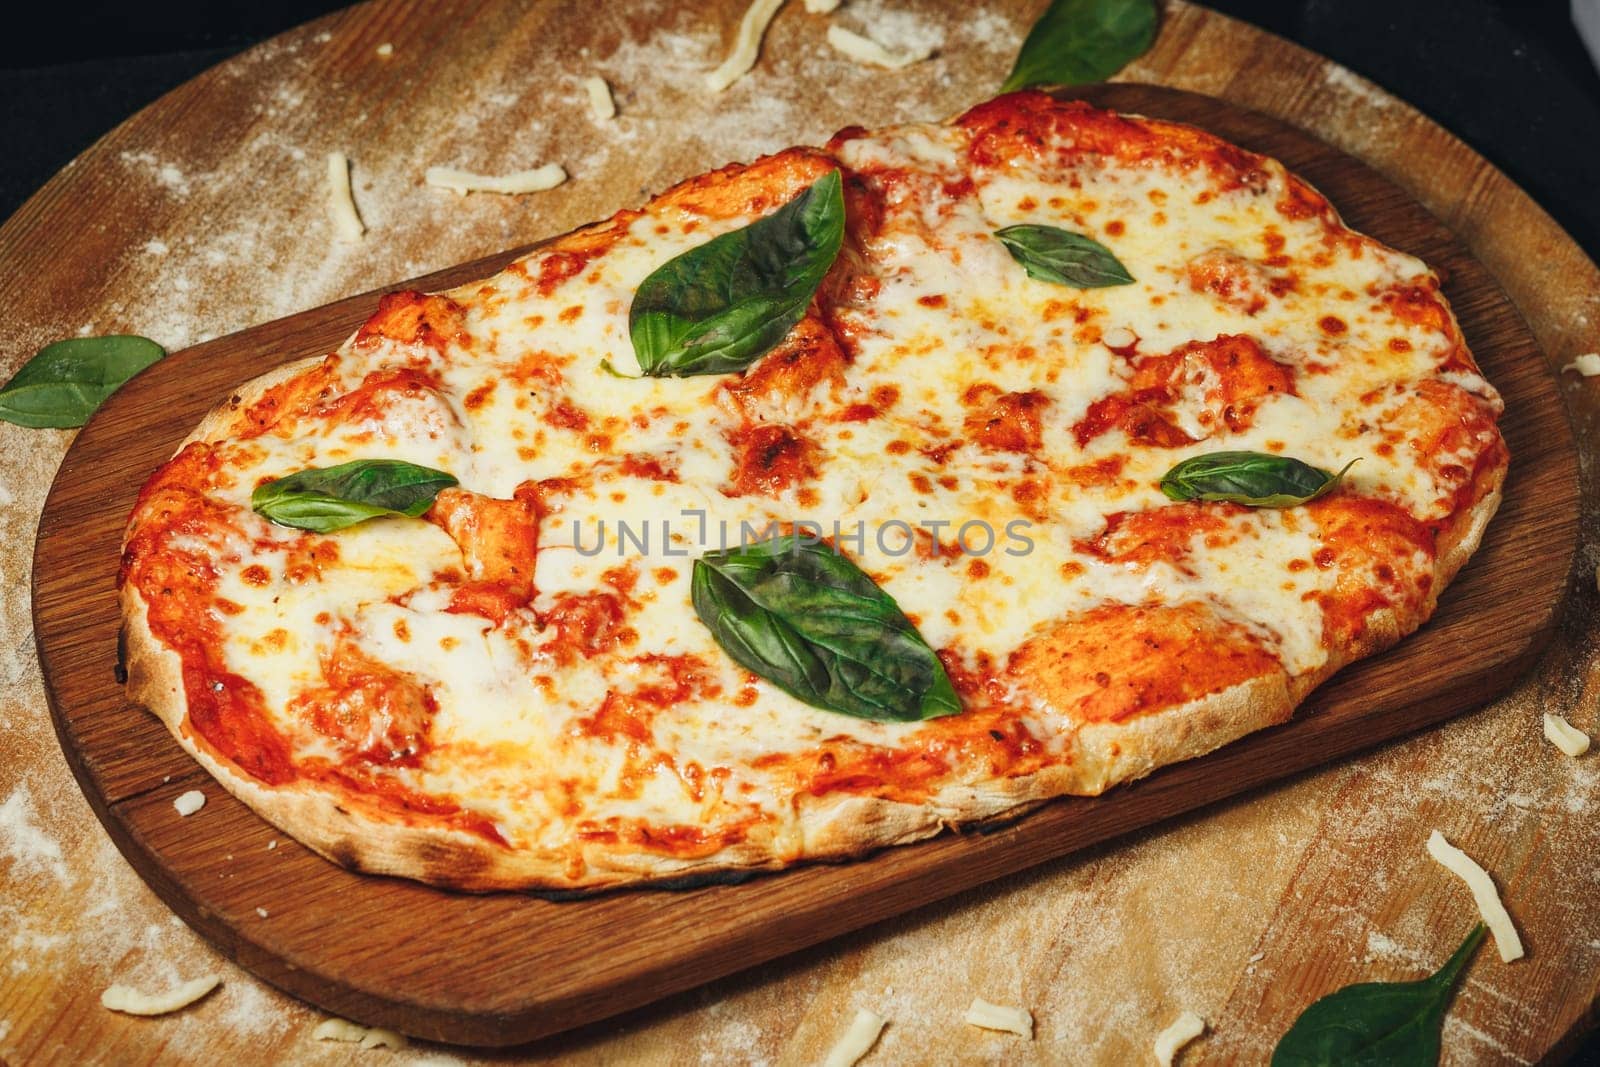 Handcrafted Heart-A heart-shaped Margherita pizza with melted cheese and basil on a wooden cutting board.Shaped Margherita Pizza on Wooden Board, Garnished With Fresh Basil Leaves. High quality photo